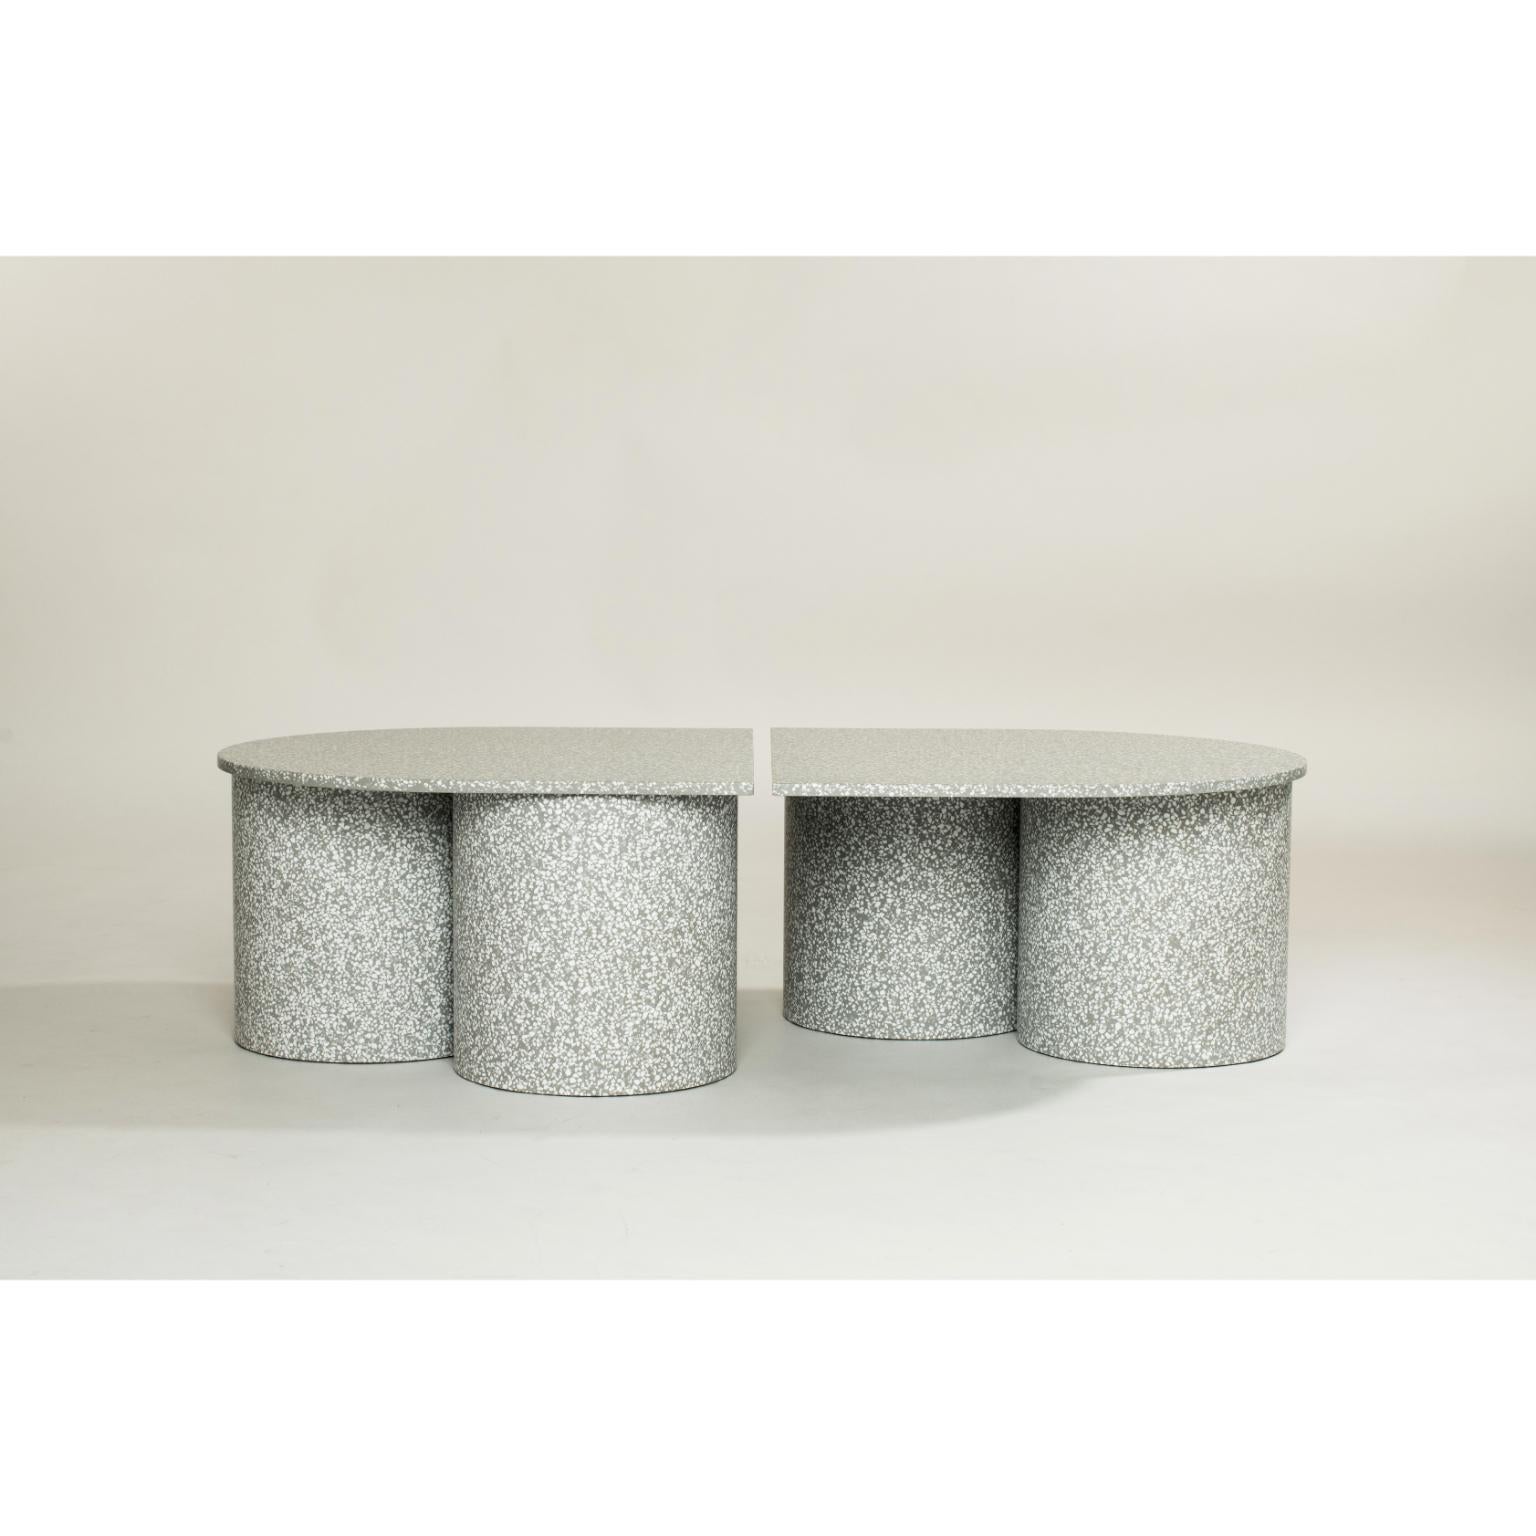 Low twins coffee table by Pietro Franceschini
Sold exclusively by Galerie Philia
Manufacturer: Moranduzzo
Dimensions: W 57 x L 53 x H 29cm (x2)
Materials: Corian, peddle terrazzo.


Pietro Franceschini is an architect and designer based in